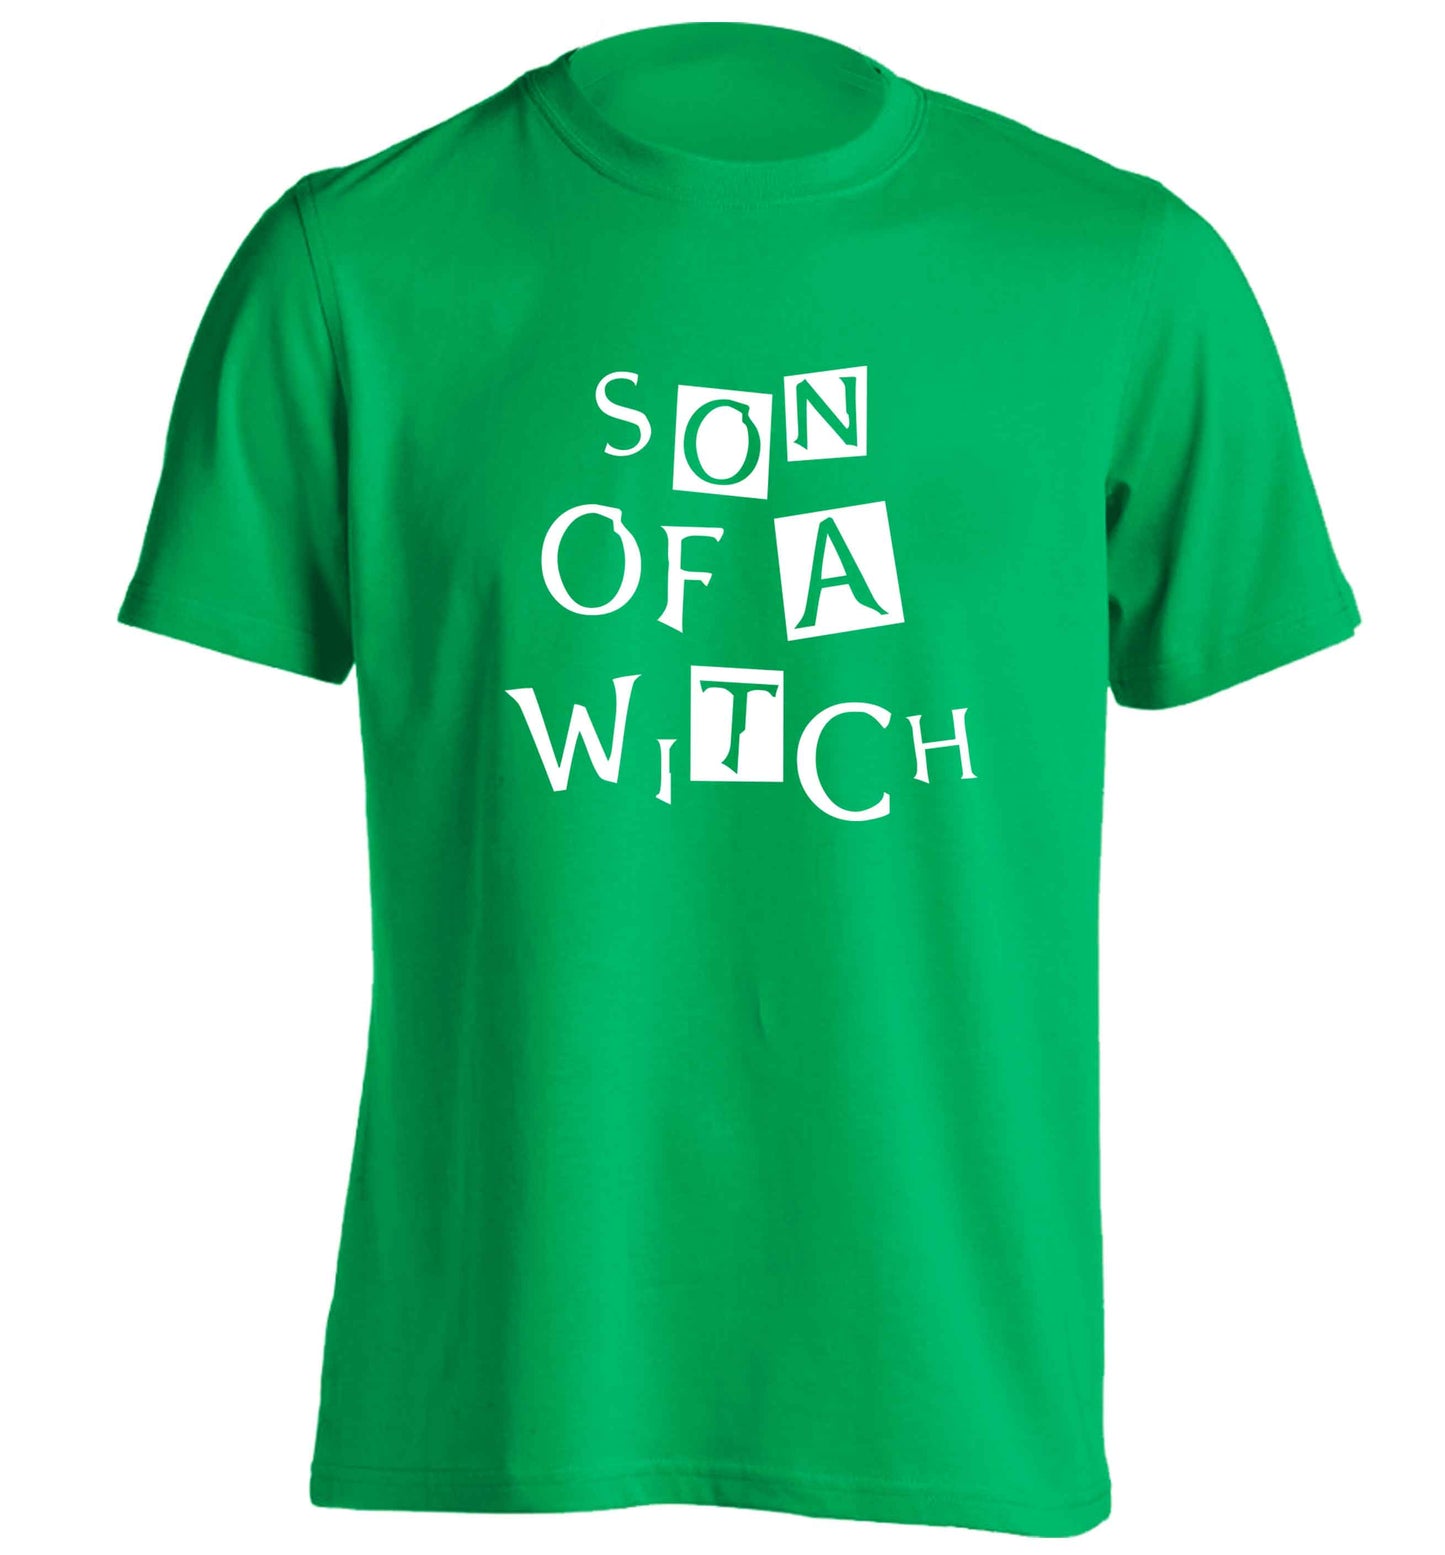 Son of a witch adults unisex green Tshirt 2XL